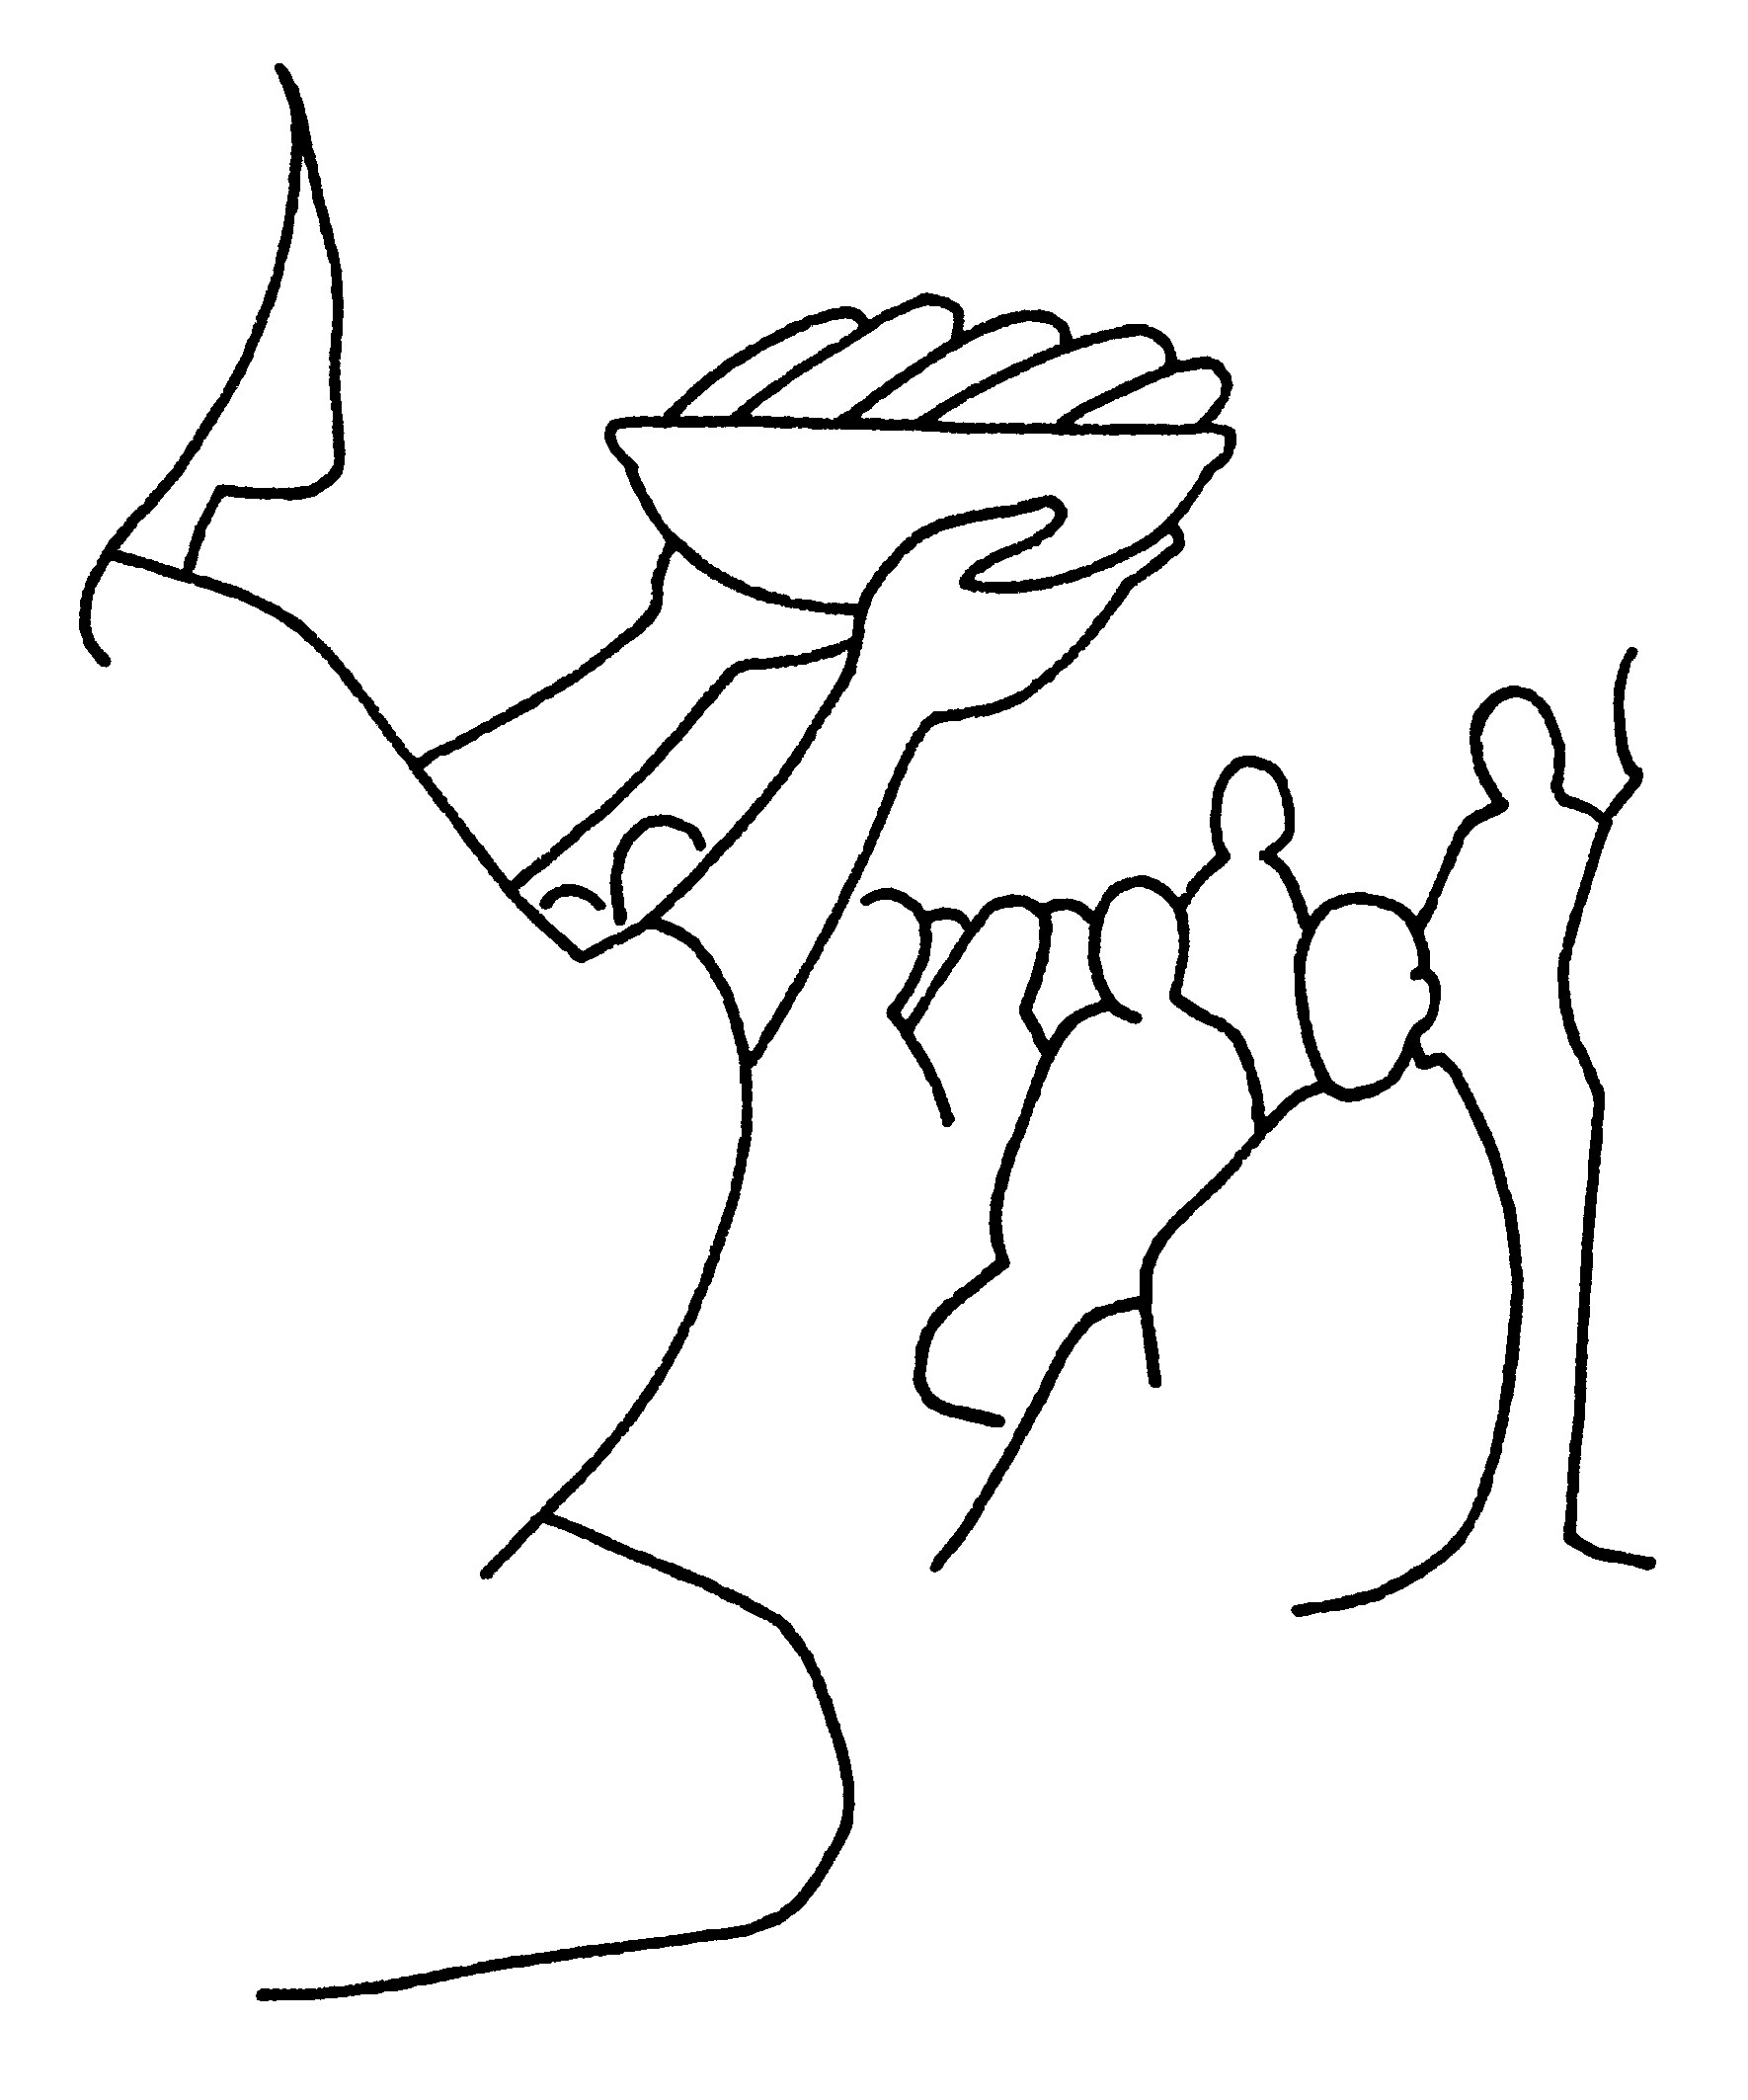 Miracles of Jesus Coloring Pages